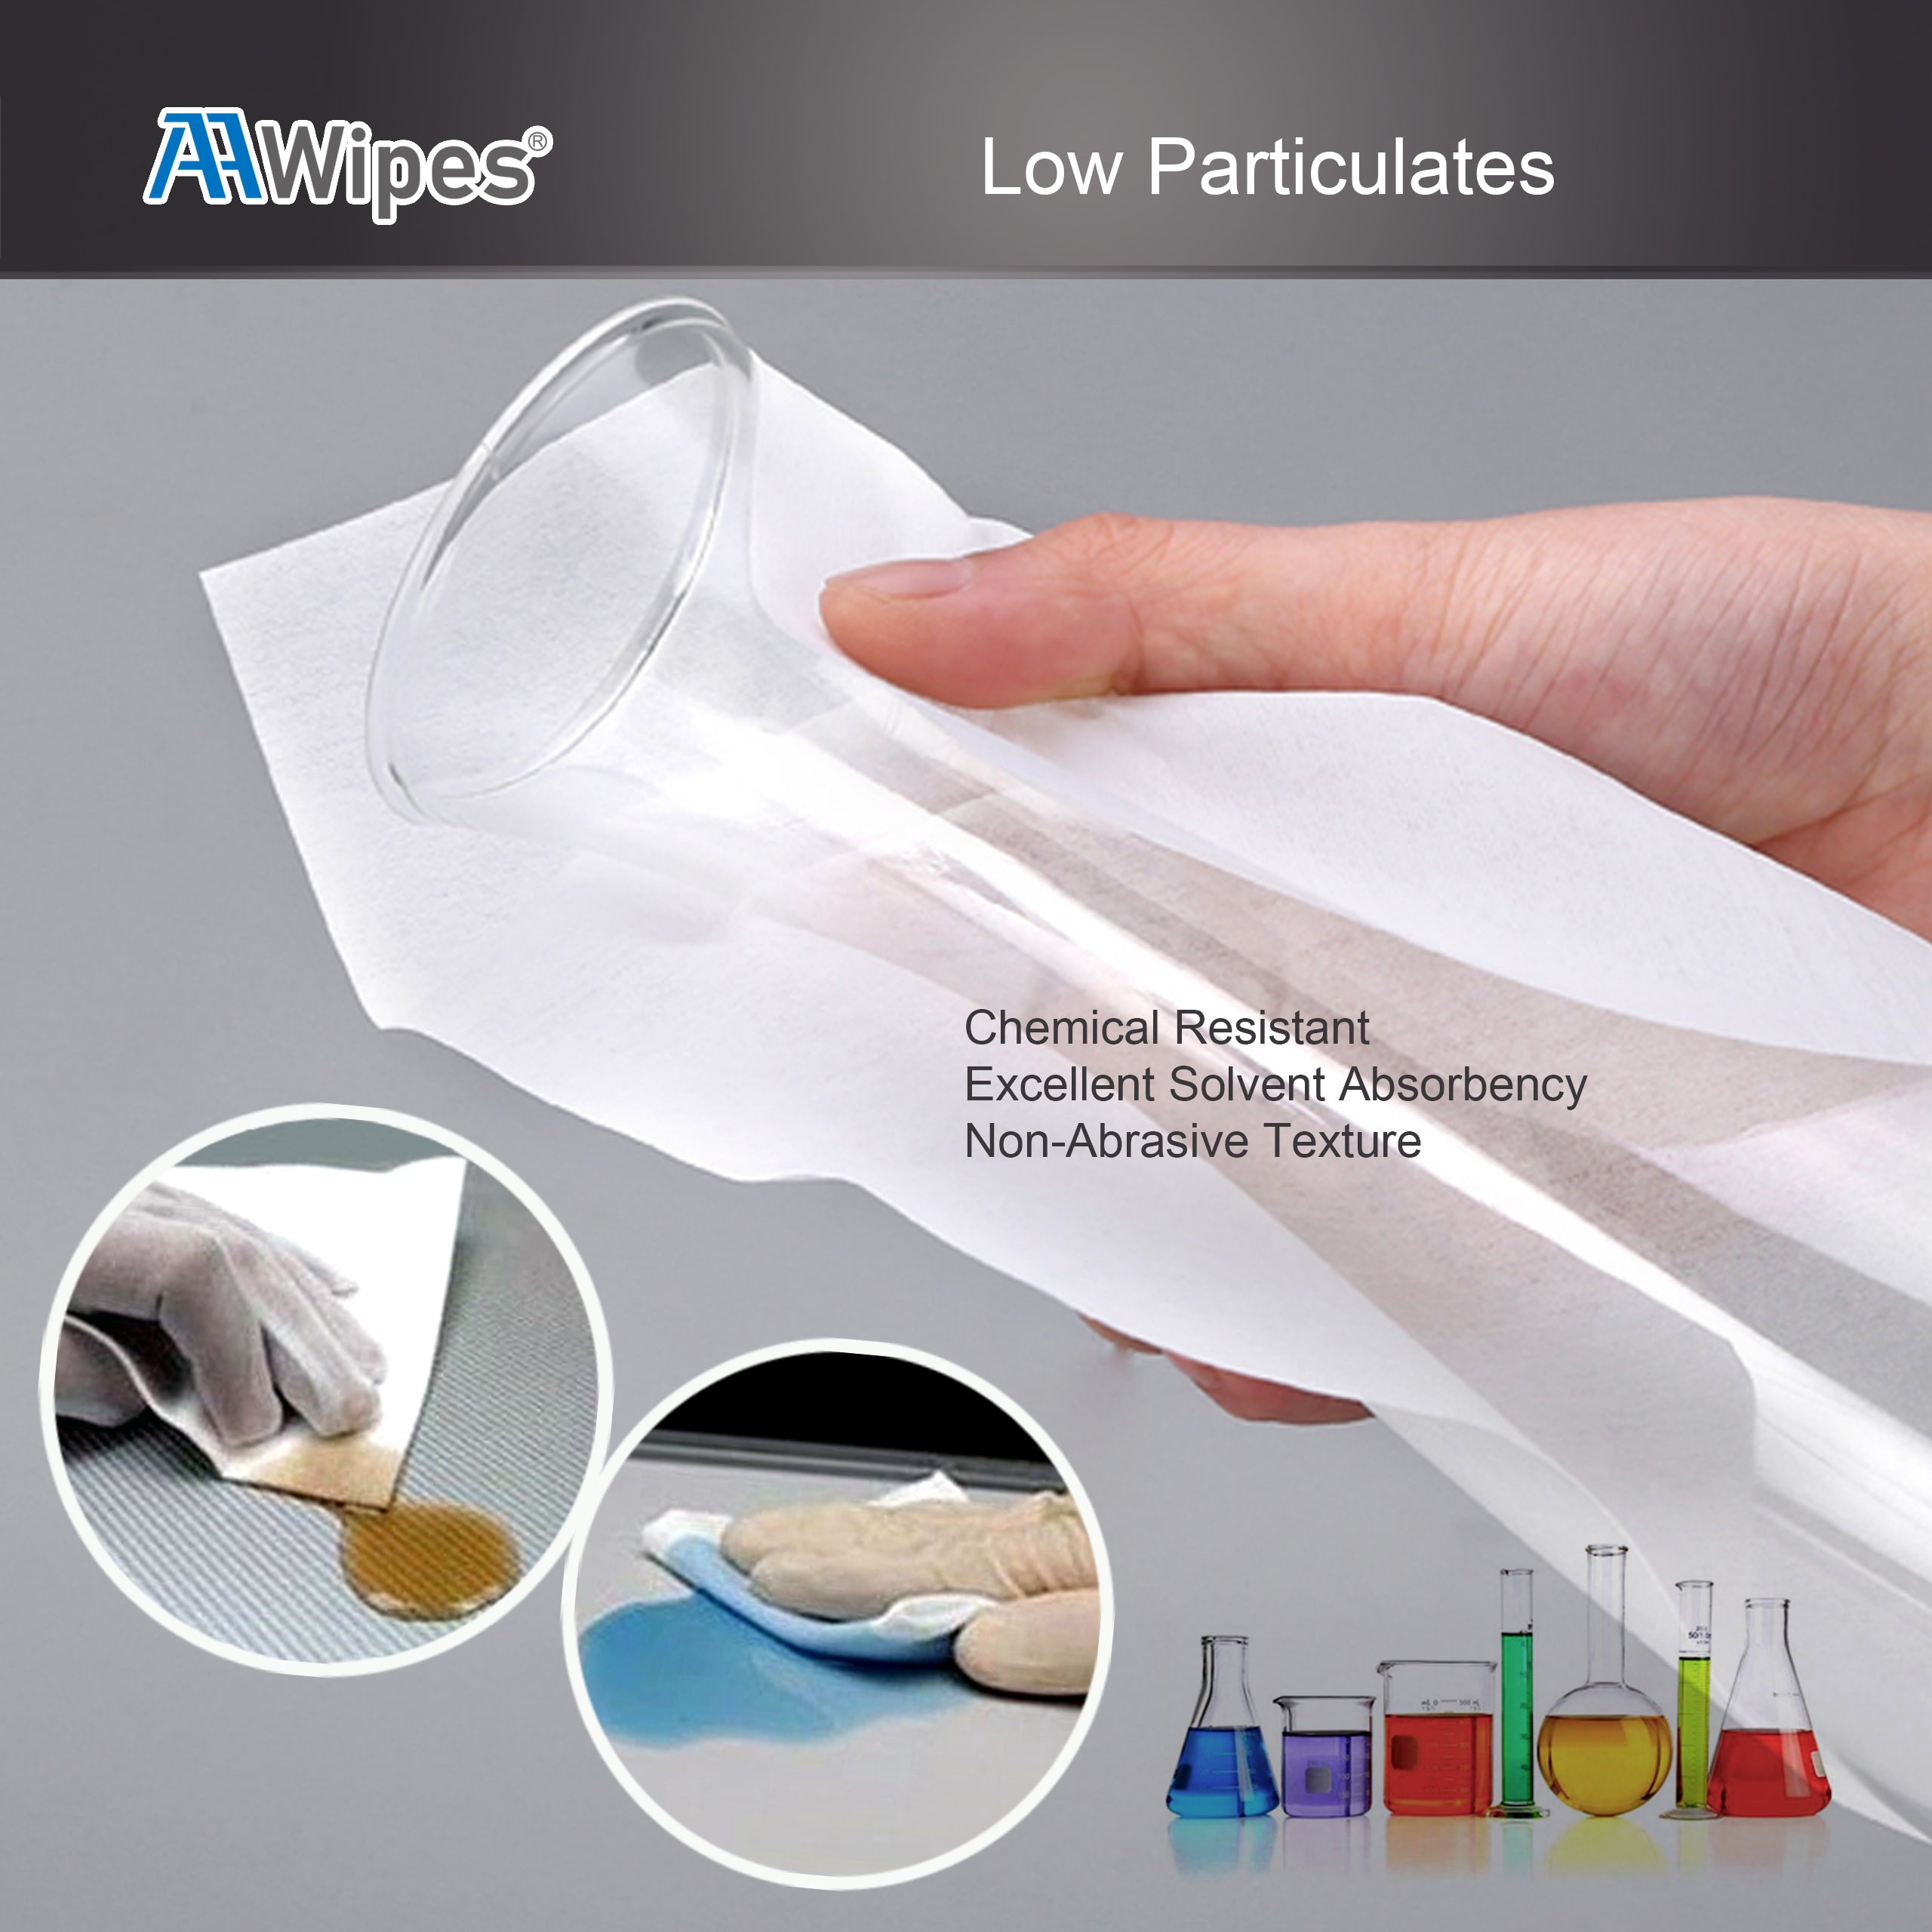 Cleanroom Nonwoven Wipes: 12"x12" Cellulose/Polyester Wipers for for Lab, Electronics, Pharmaceutical, Printing and Semiconductor Industries. 3,000 wipes/box in 20 bags (No. NW06812).